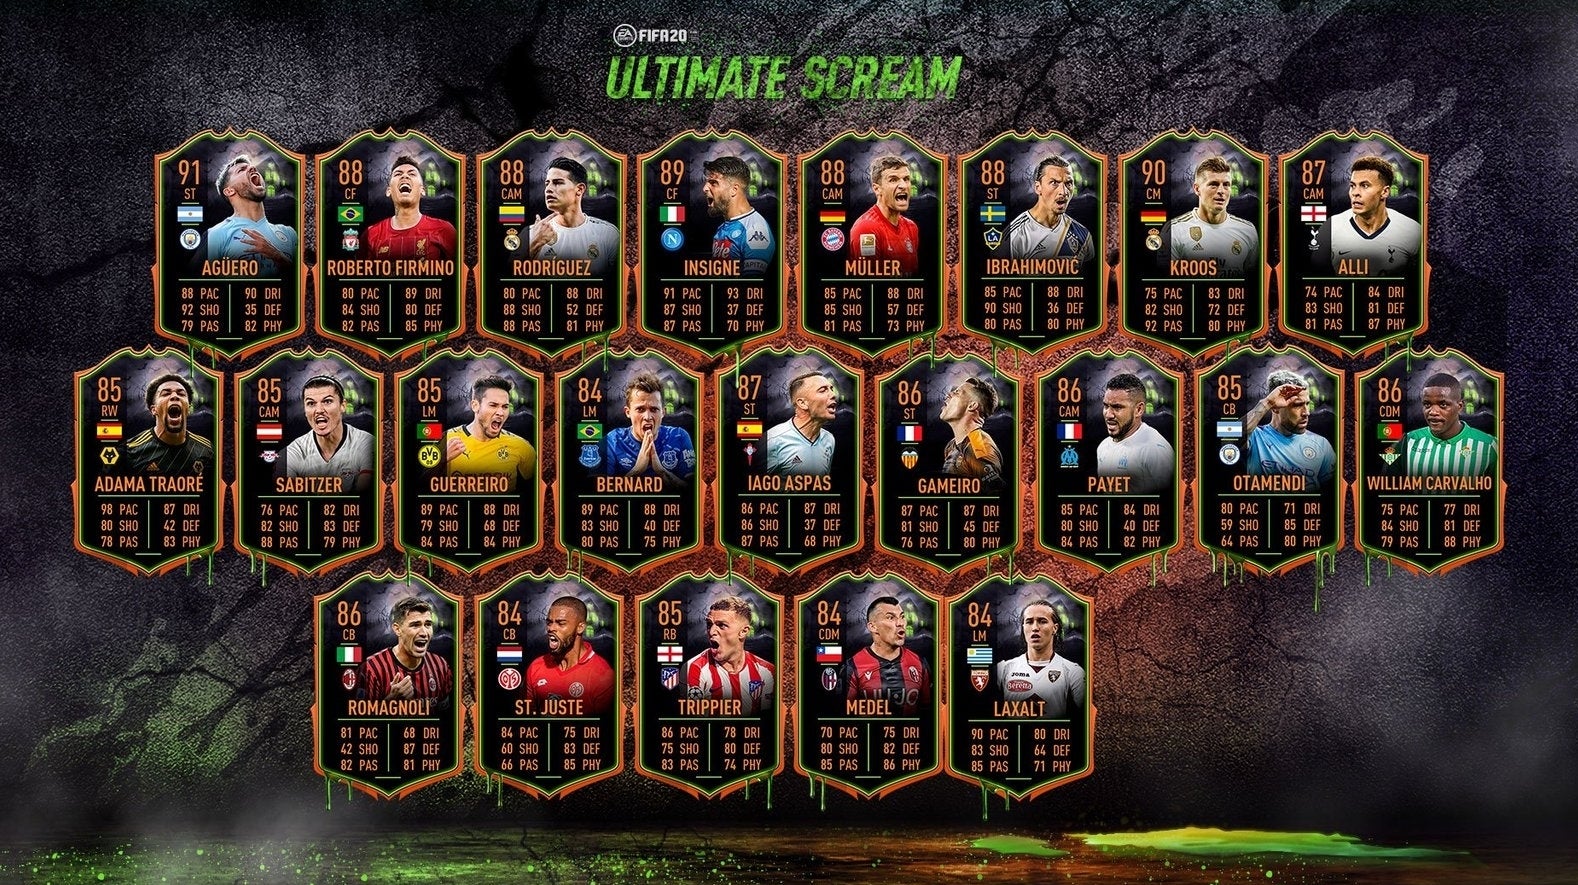 FIFA 20 Ultimate Scream cards players list: Giovinco, Ozil, and the Ultimate Scream end date time |